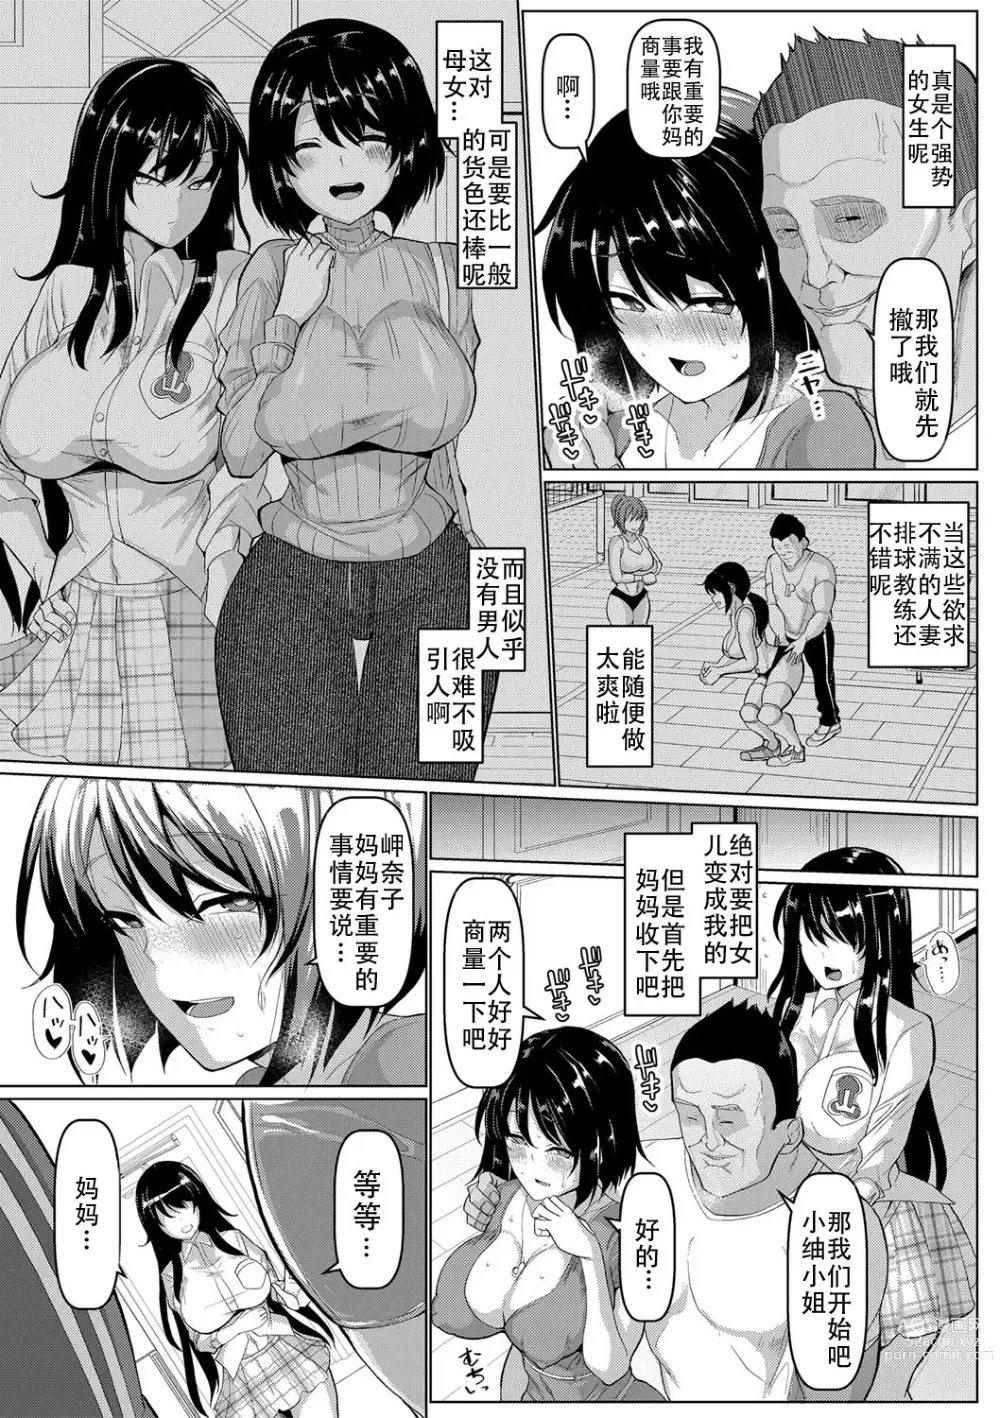 Page 3 of manga Oyako de Nerae! Sex Number One